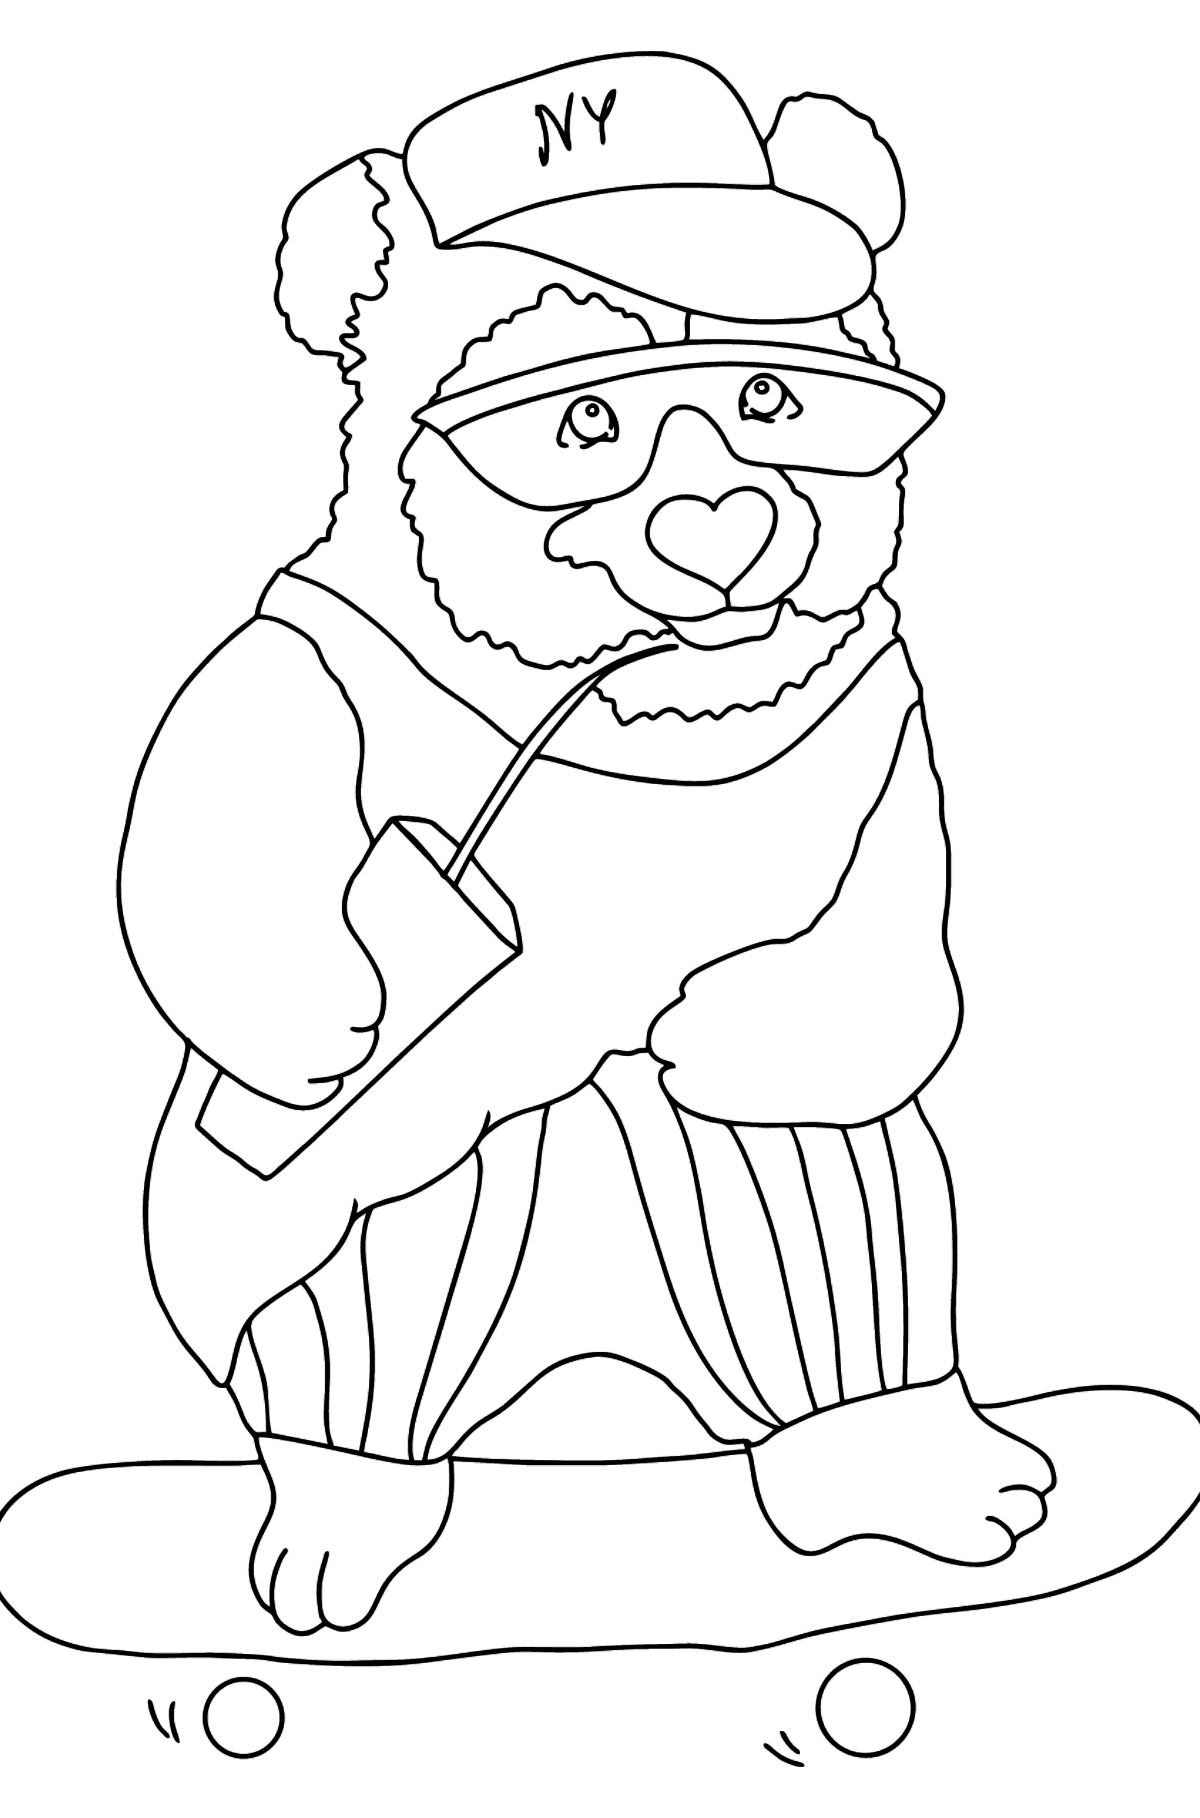 Fun Panda (Hard) coloring page - Coloring Pages for Kids